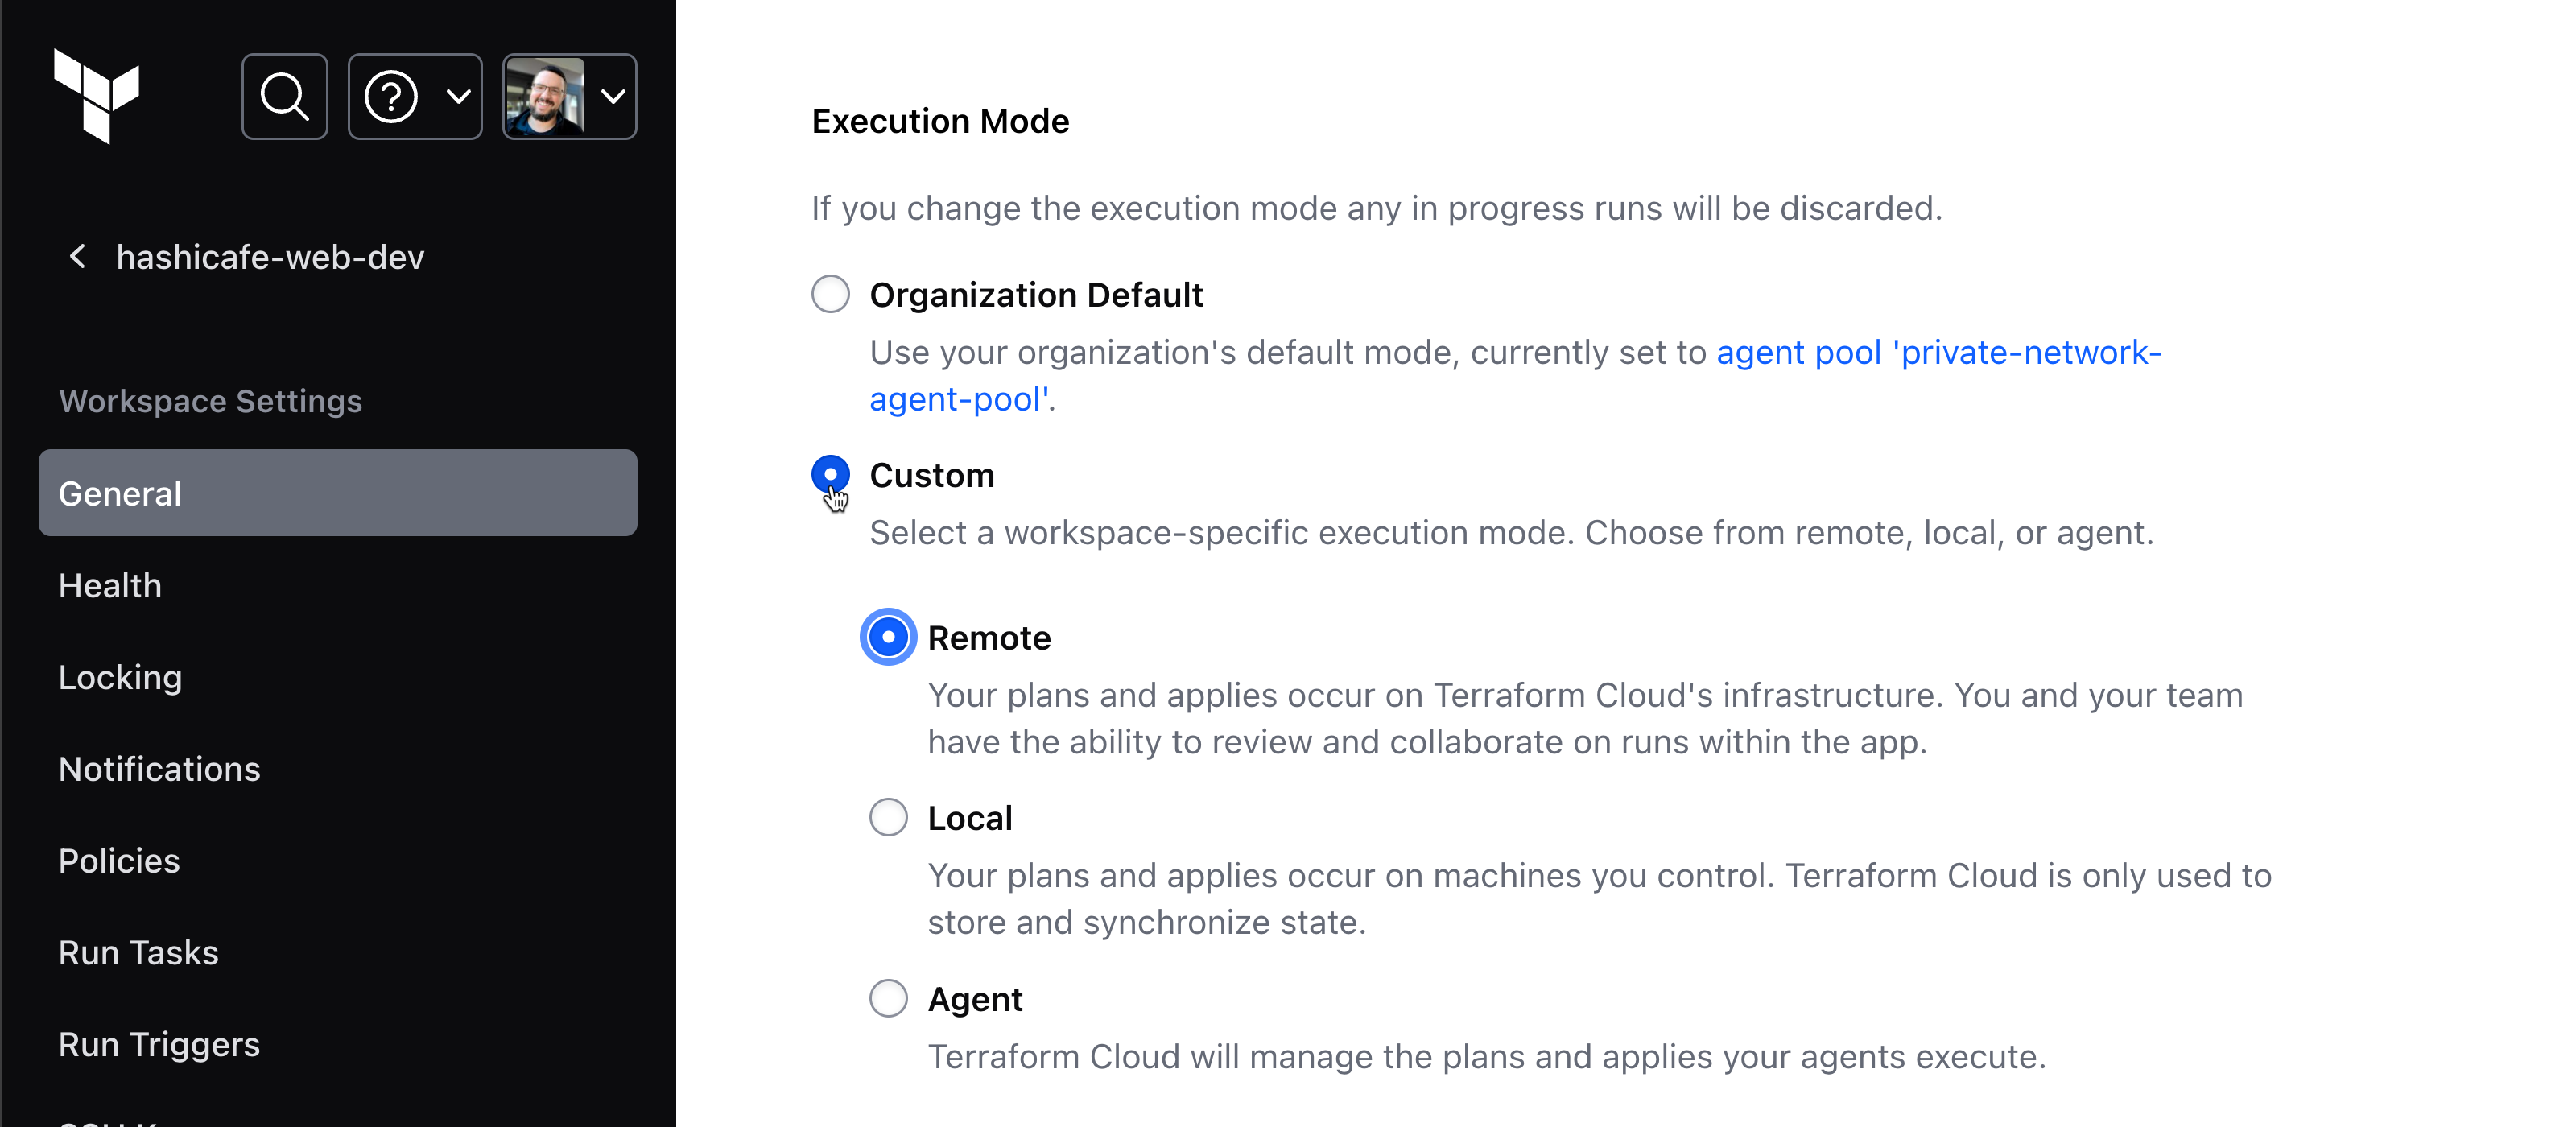 Workspace admins can override the organization's default execution mode if needed.